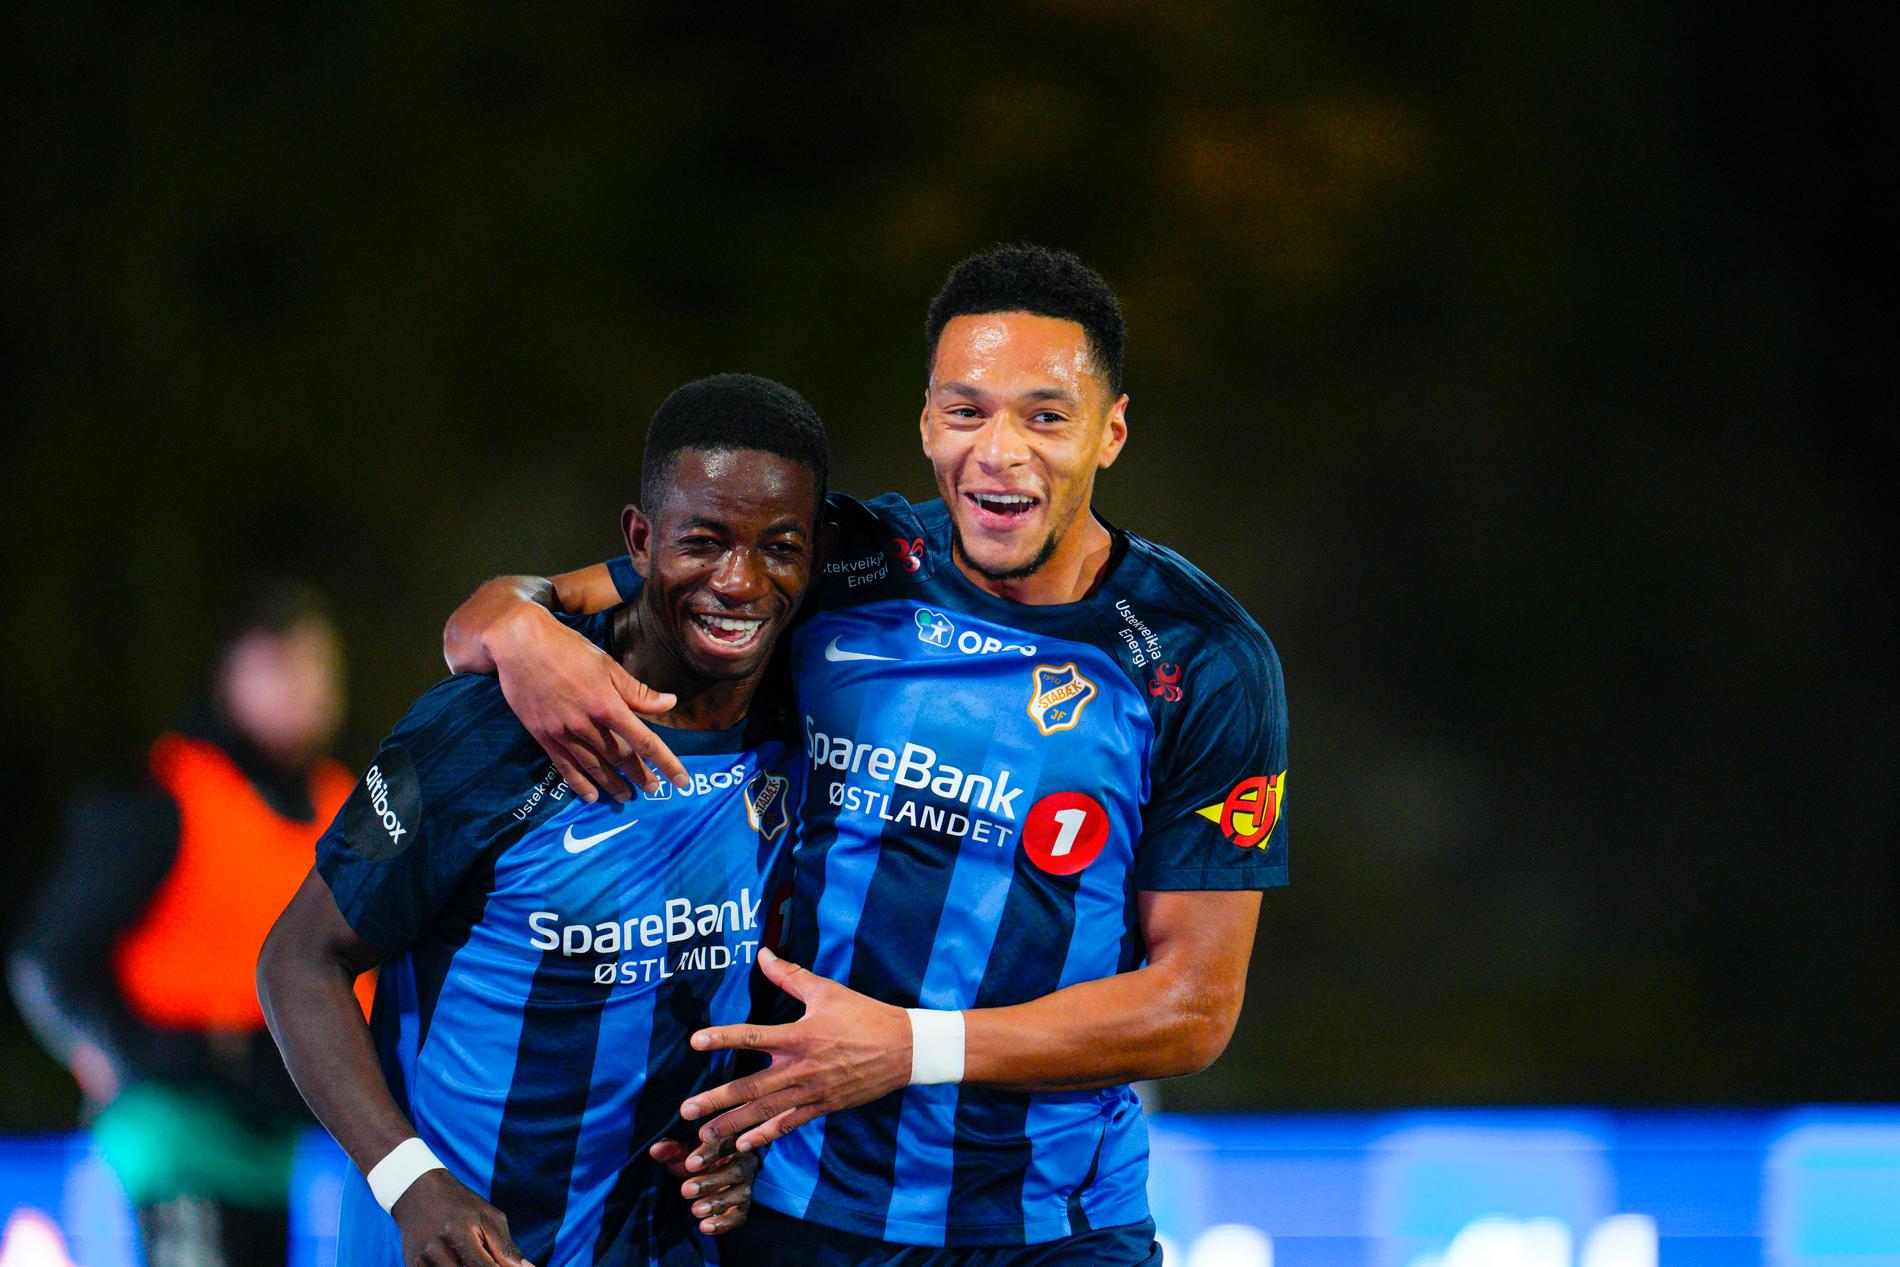 Stabæk smashed HamKam in the bottom game – his first win since May